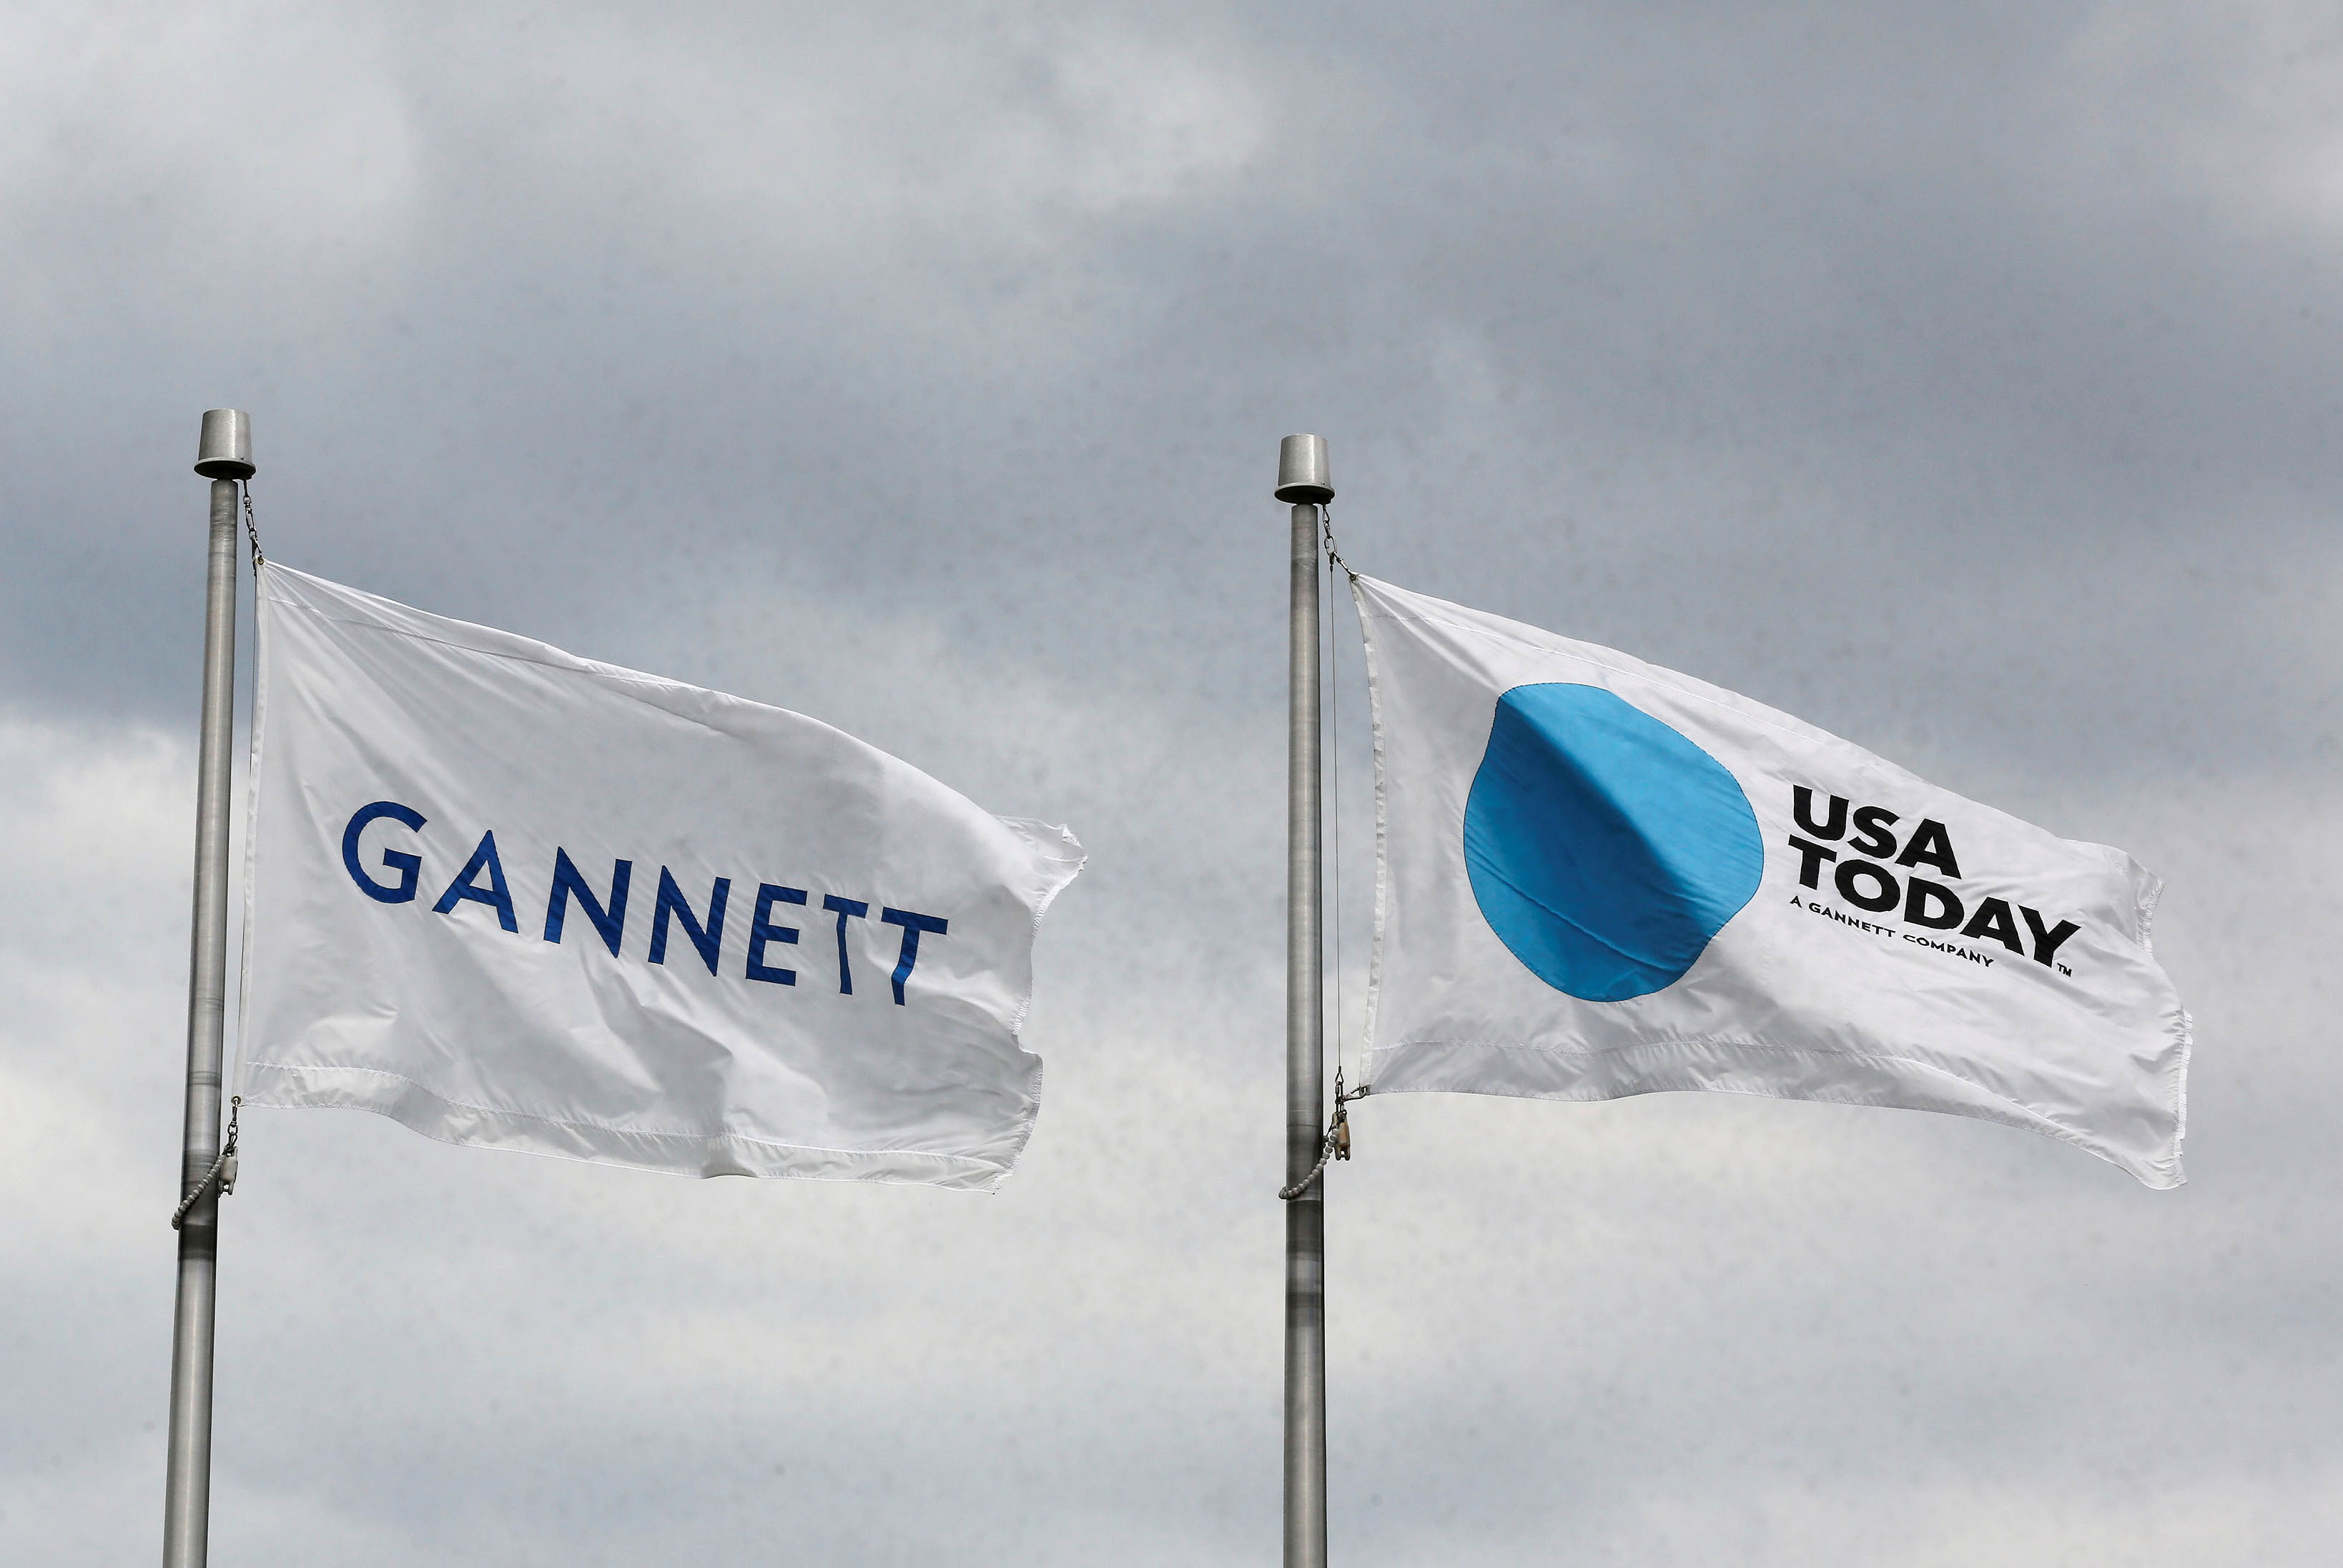 The corporate flags for the Gannett Co and its flagship newspaper, USA Today, fly outside their corporate headquarters in McLean, Virginia, July 23, 2013. REUTERS/Larry Downing  (UNITED STATES/File Photo